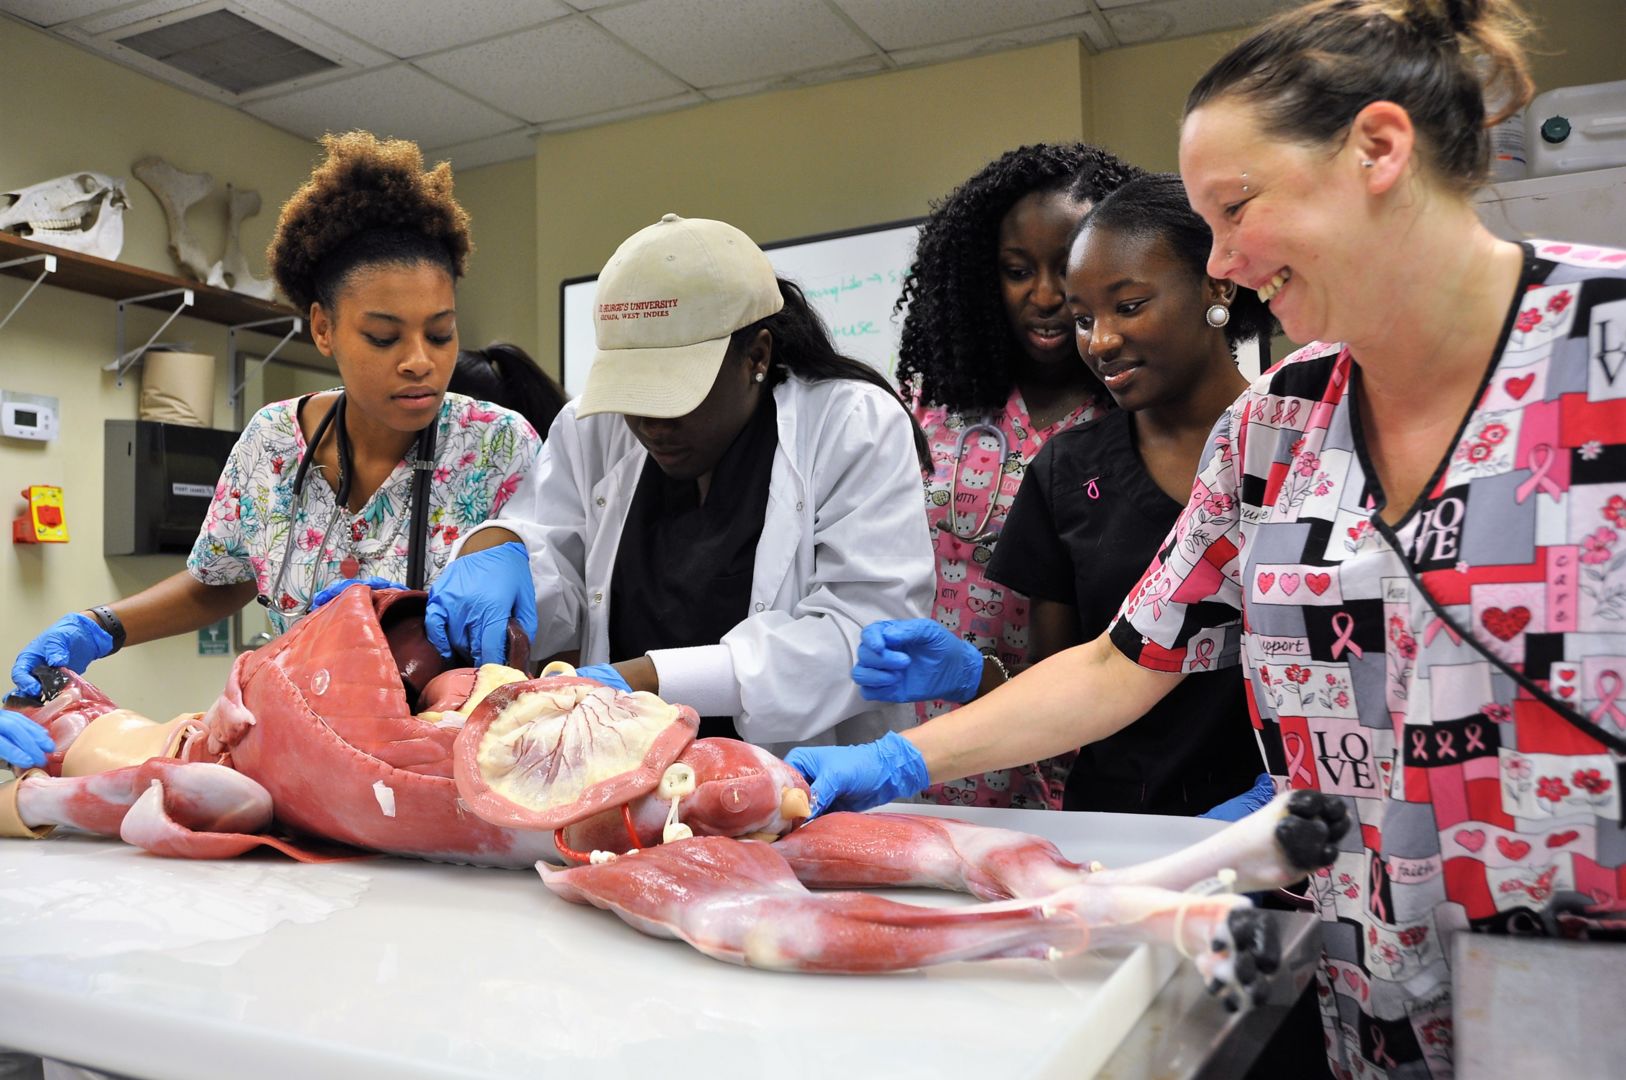 Veterinary technology student gets hand-on with a synthetic canine cadaver while her classmates and instructor look on.